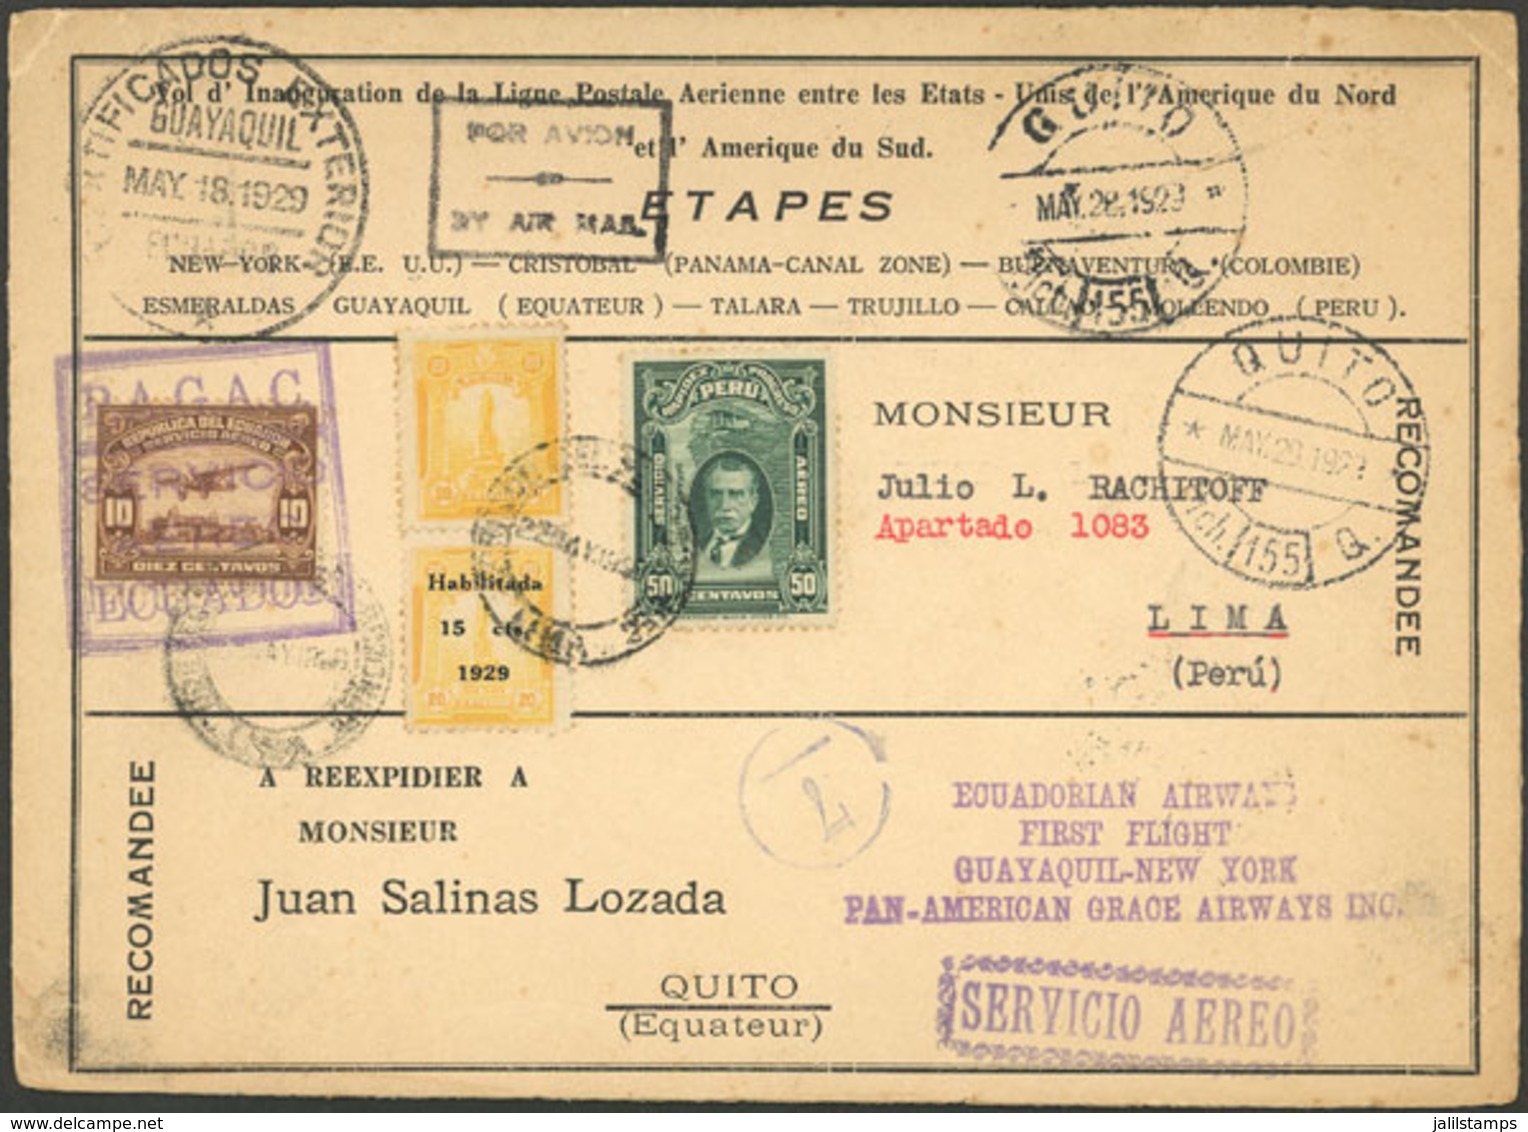 ECUADOR: 18/MAY/1929 Guayaquil - Lima (Peru) - Quito, PANAGRA First Flight, With Mixed Postage Of Both Countries, Very A - Ecuador